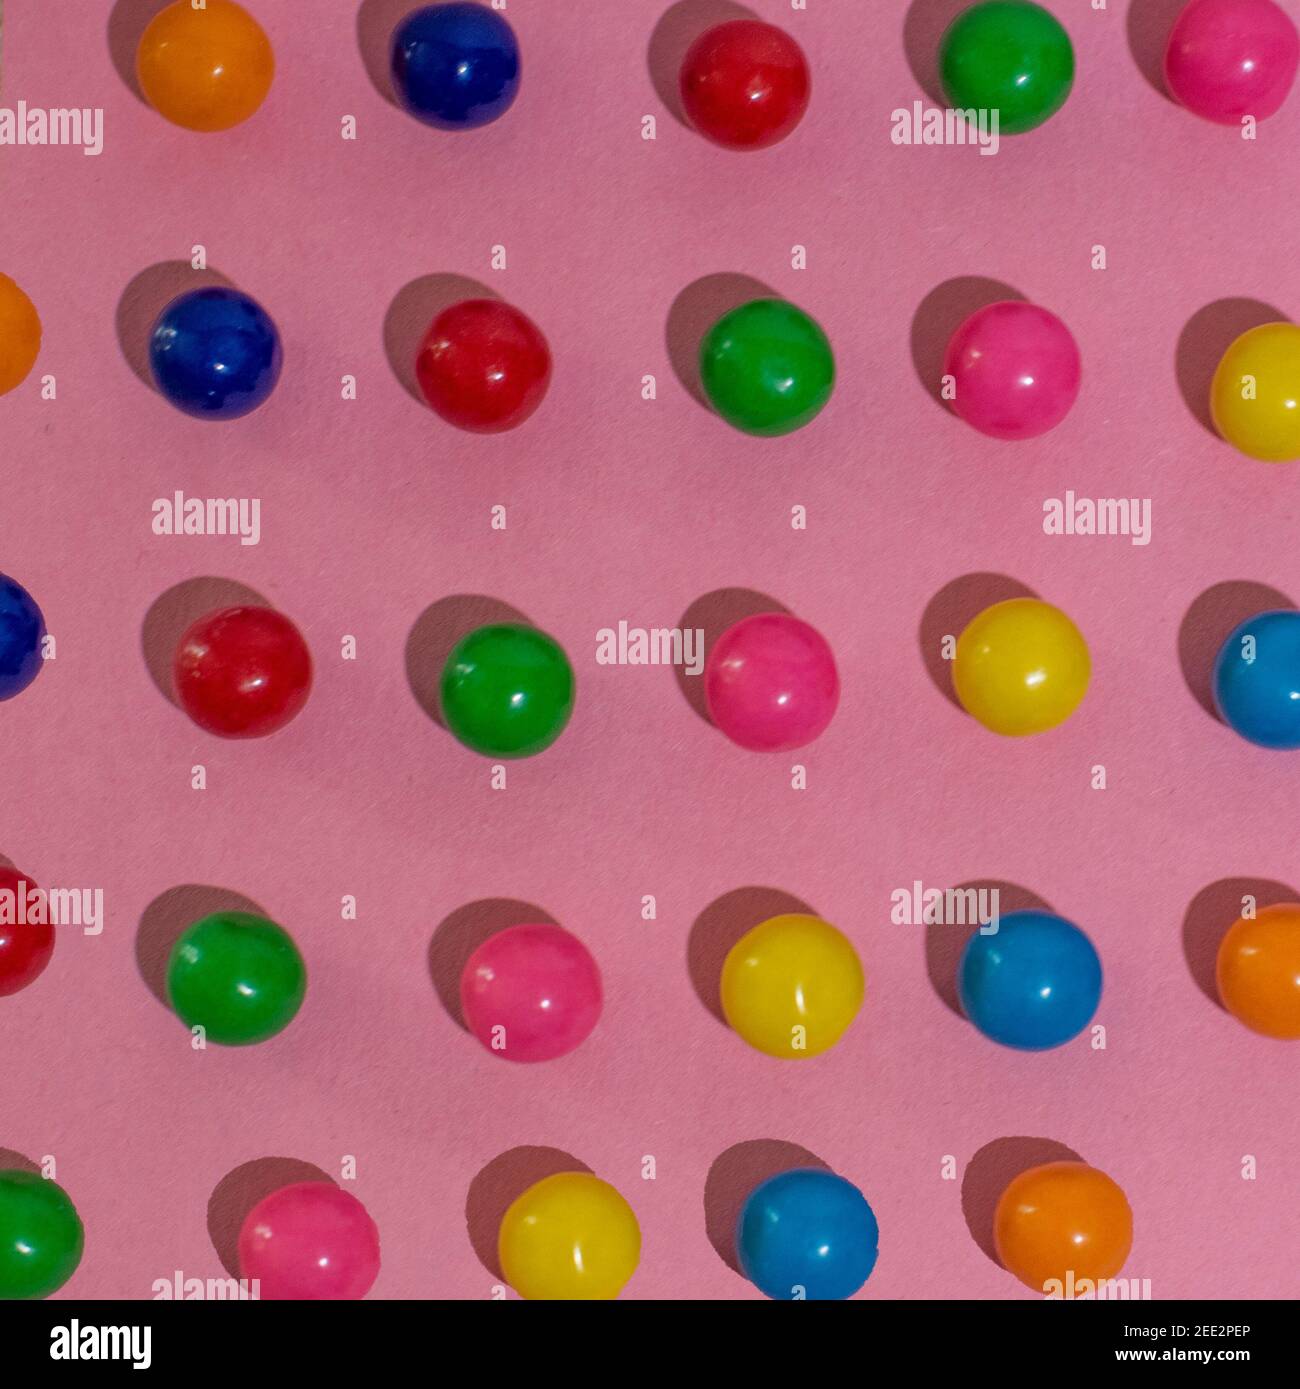 Candy is arranged on colorful paper creating repetitive patterns. Series. Stock Photo